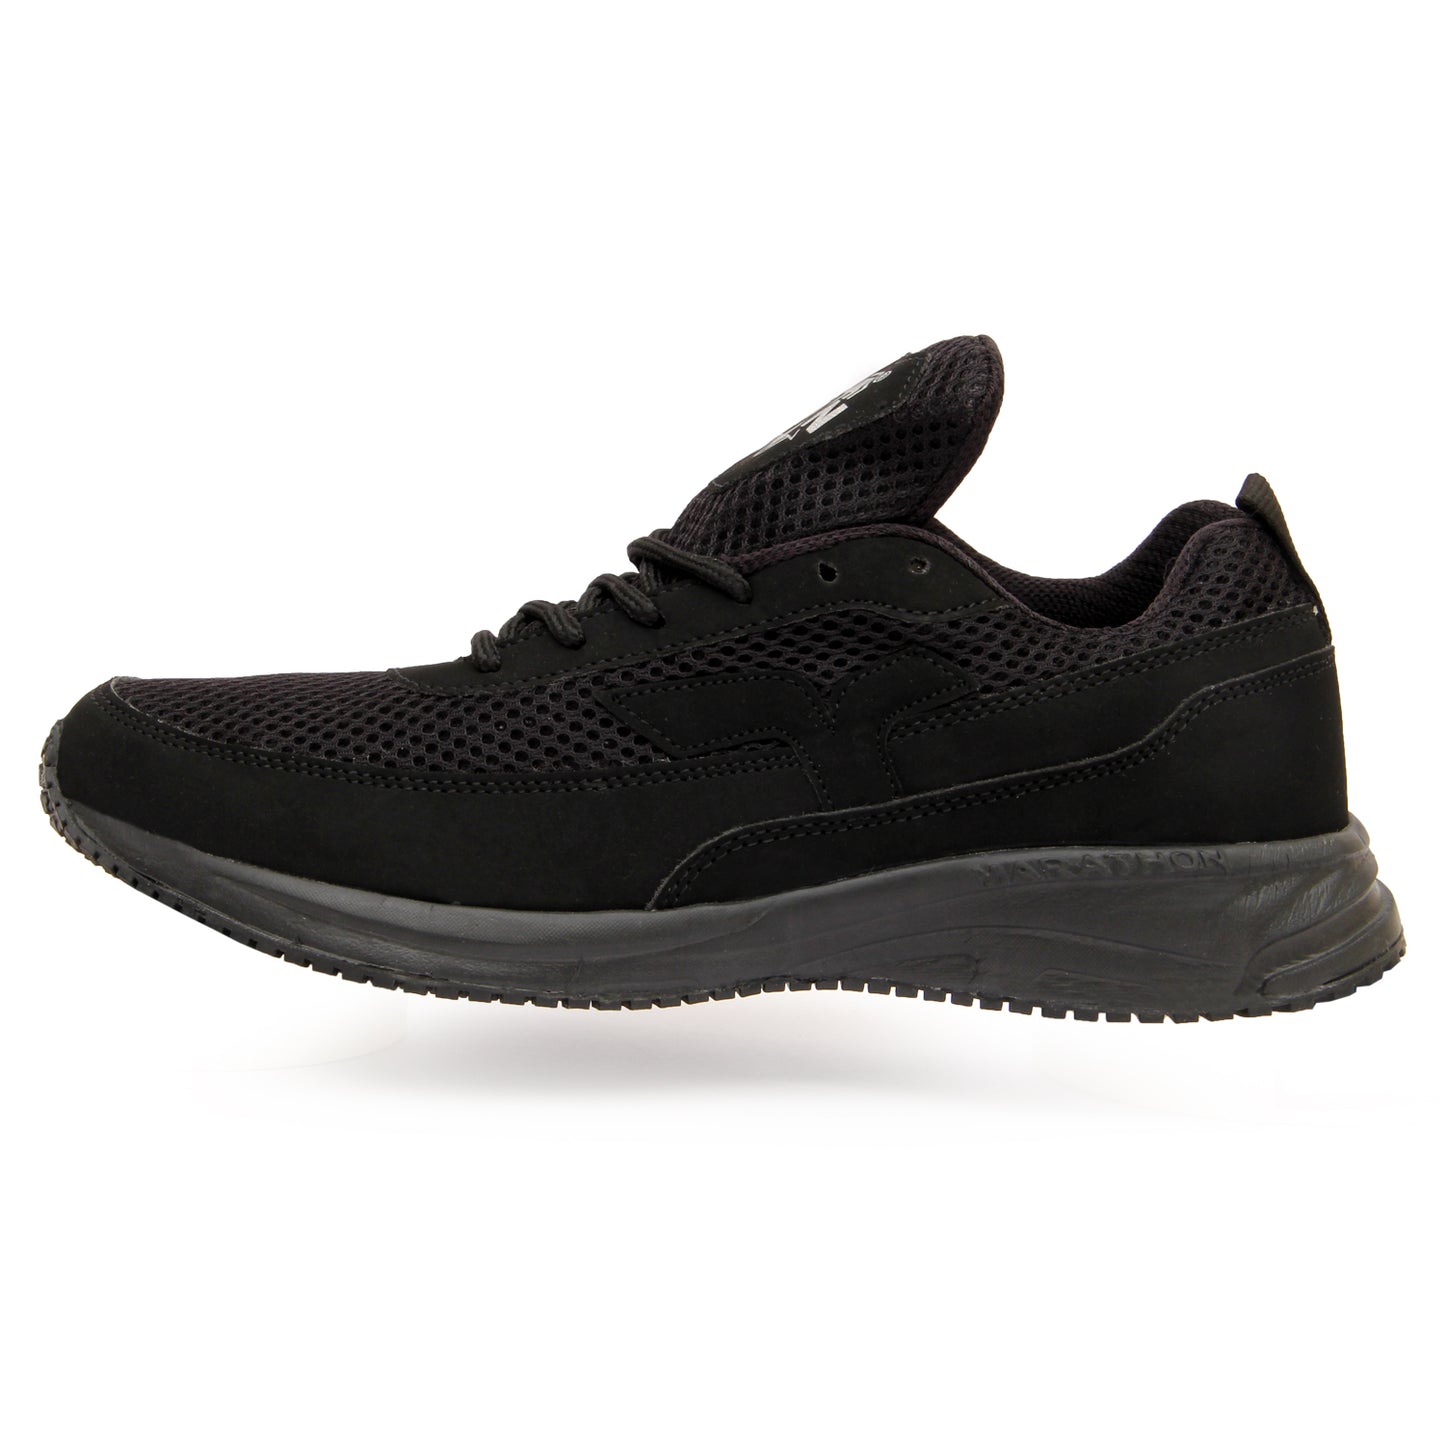 RXN Casual Style Prime Jogging Running Shoes for Men